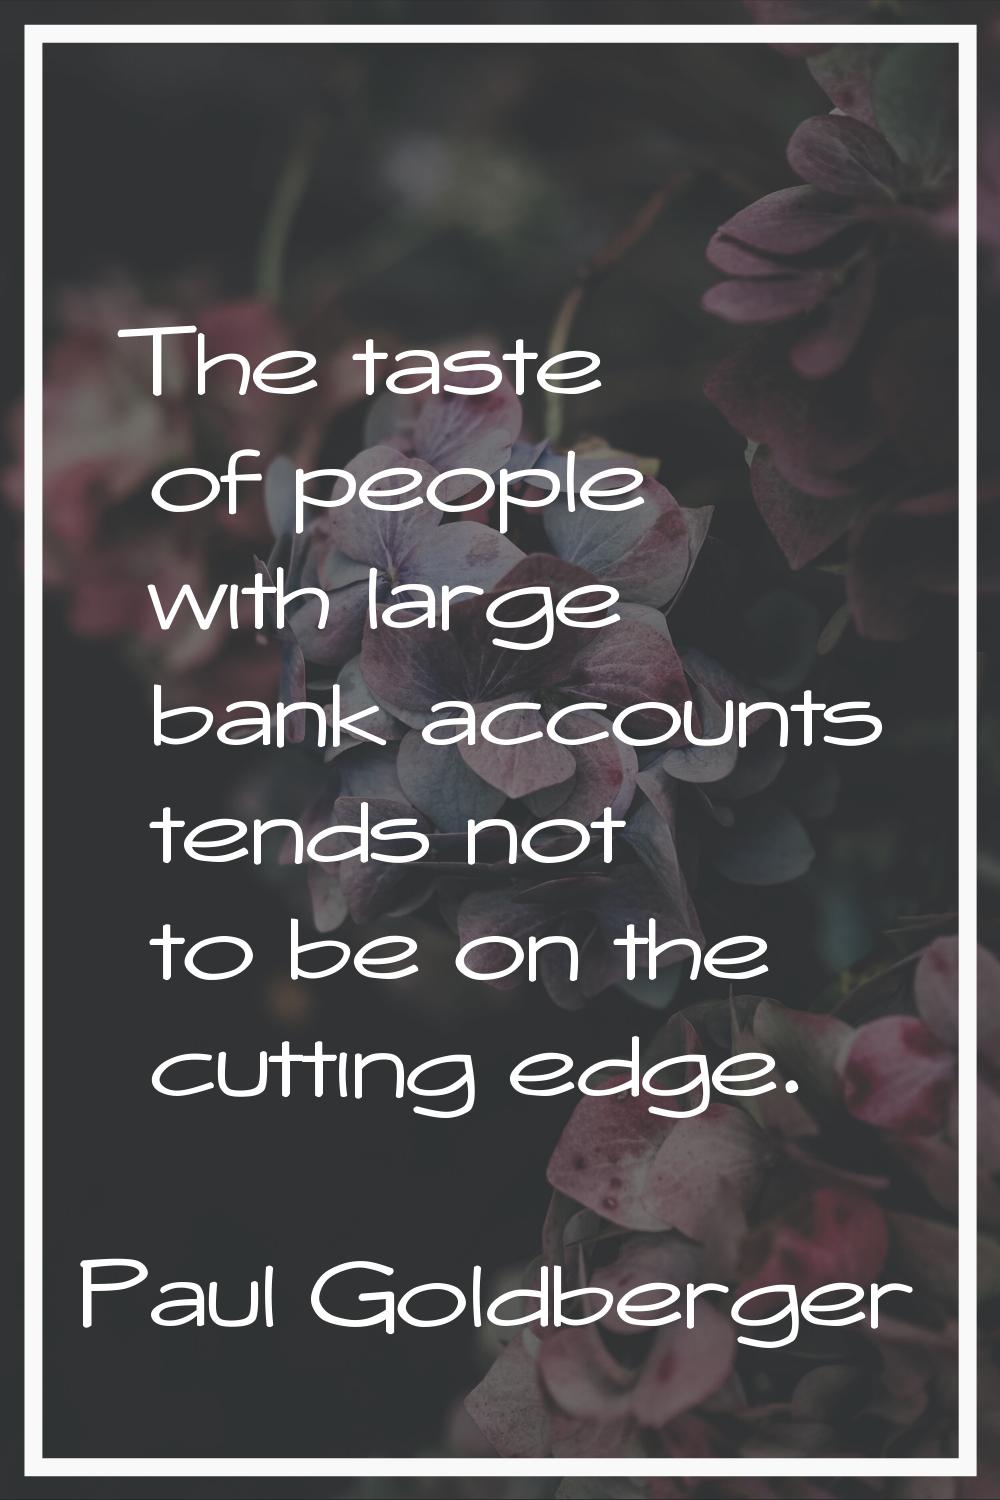 The taste of people with large bank accounts tends not to be on the cutting edge.